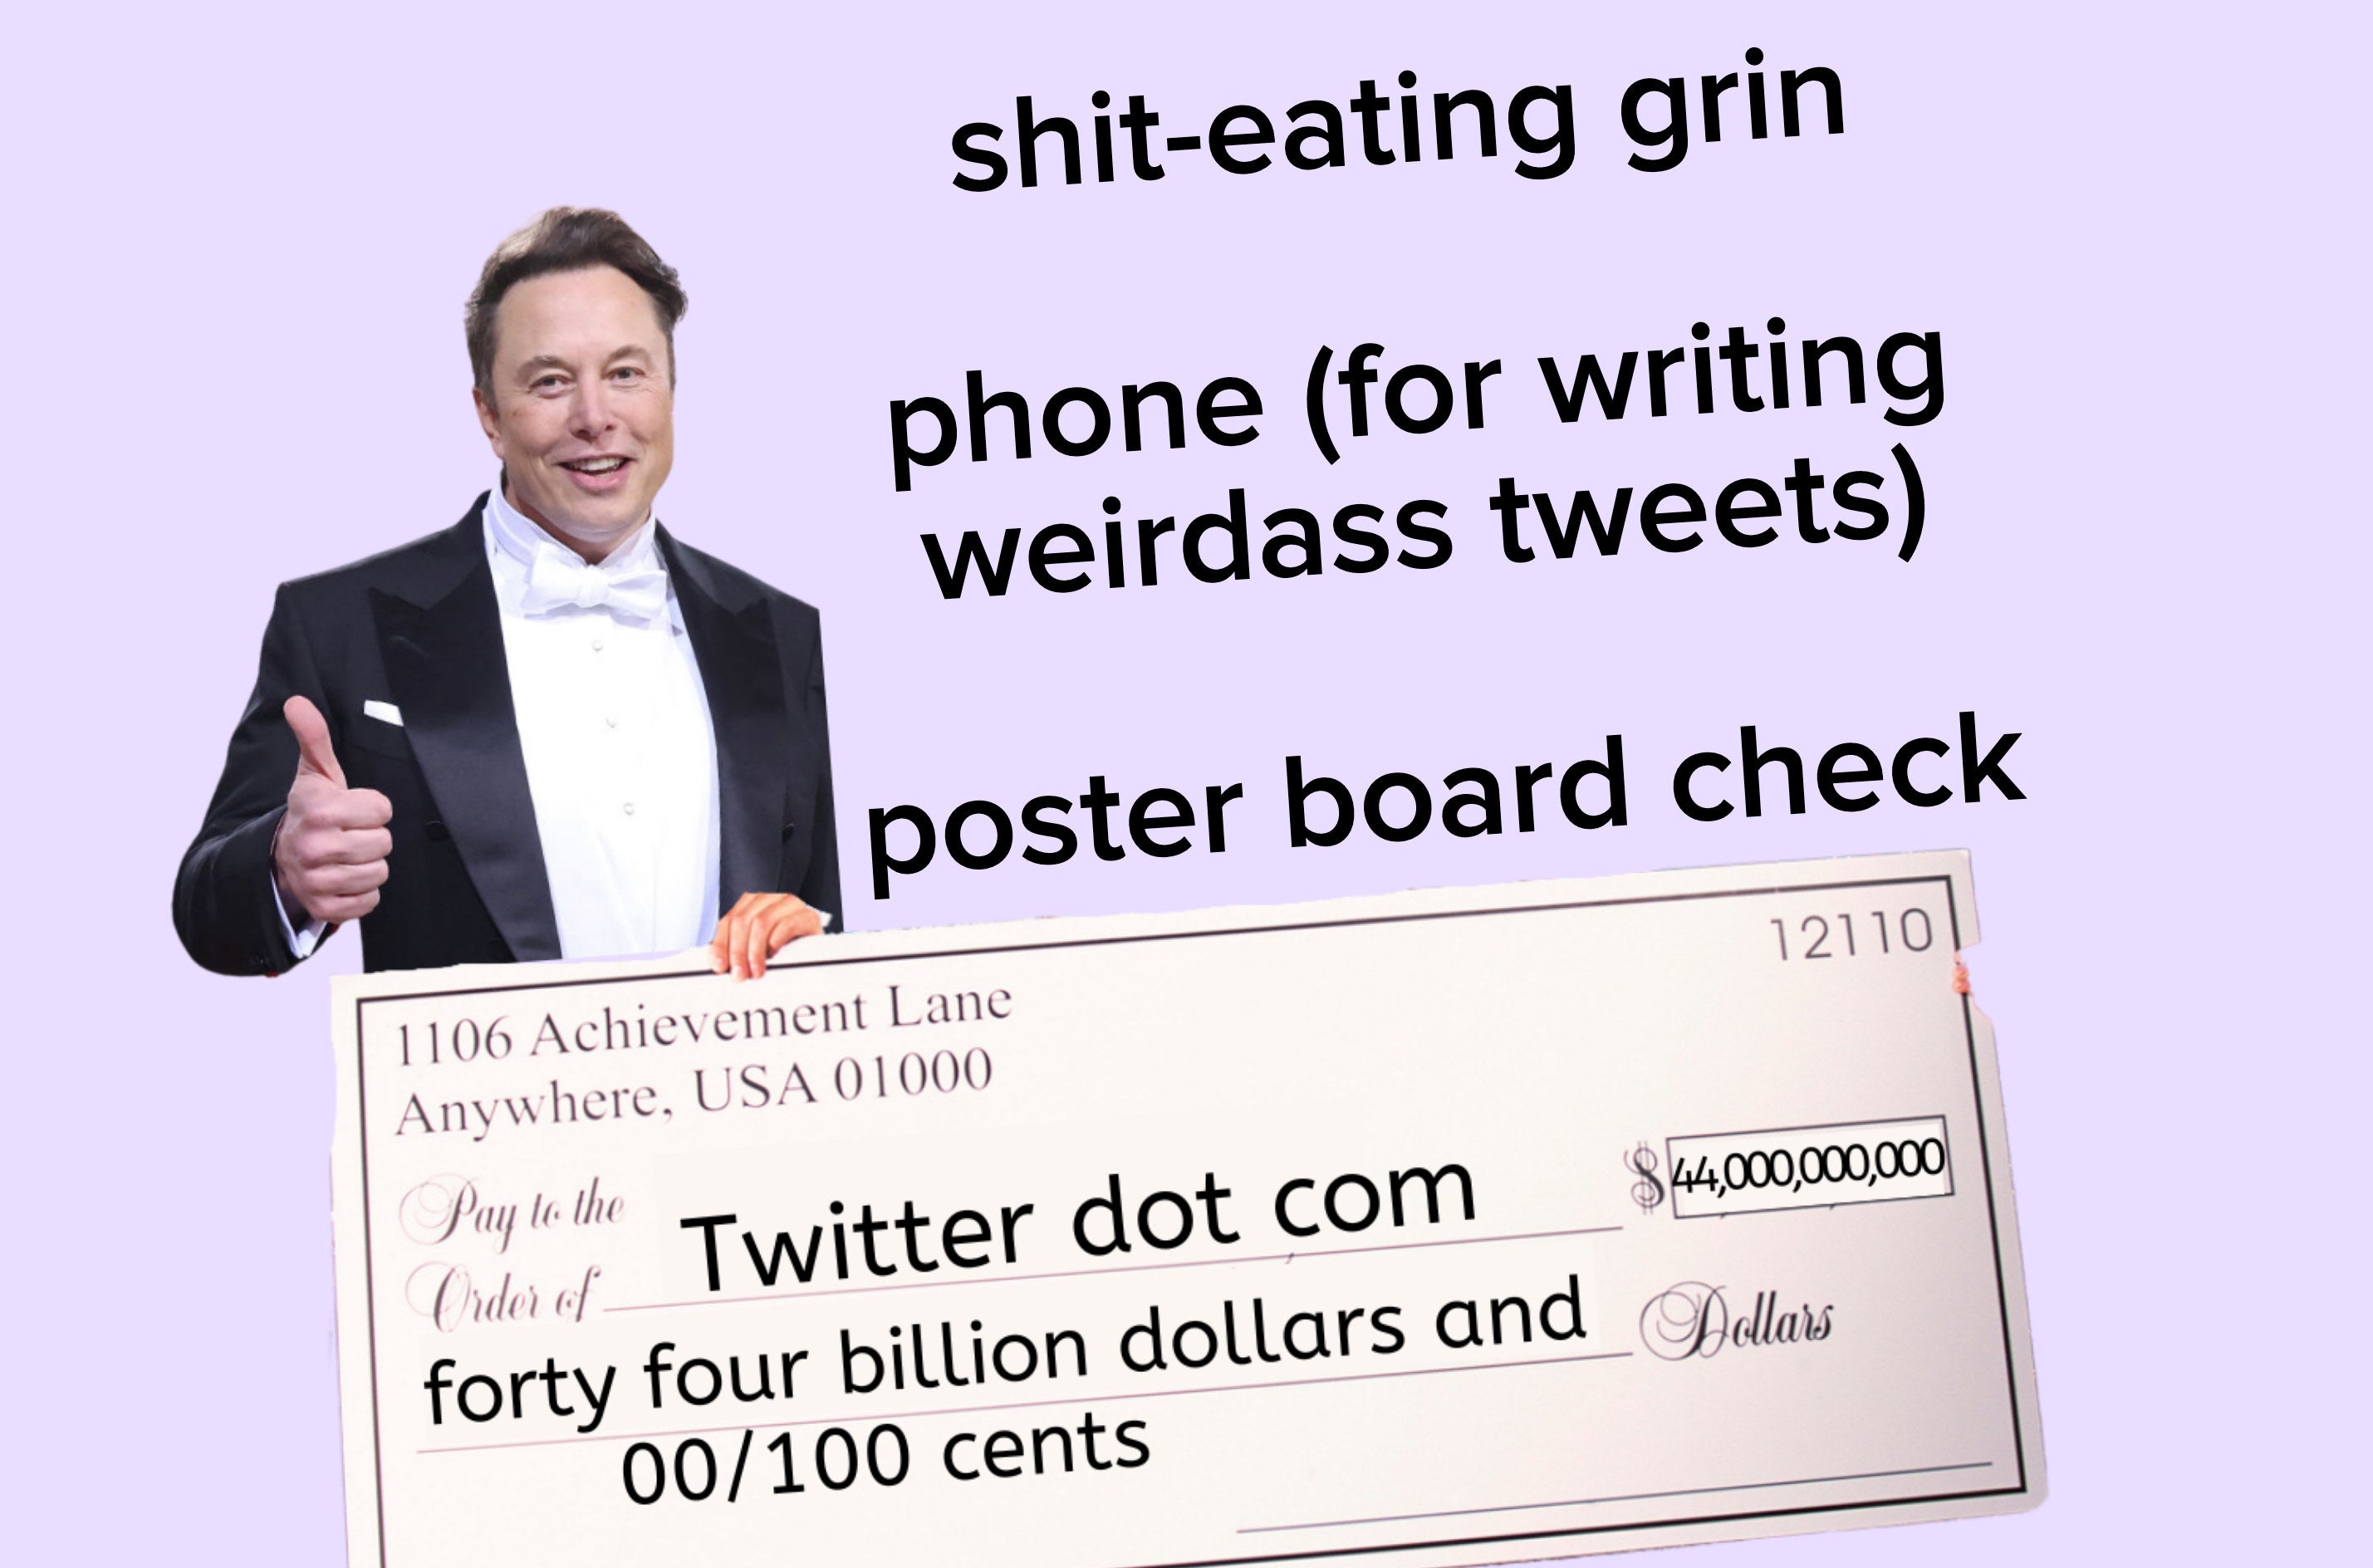 elon holding a poster board check, other props can be a phone and a shit-eating grin